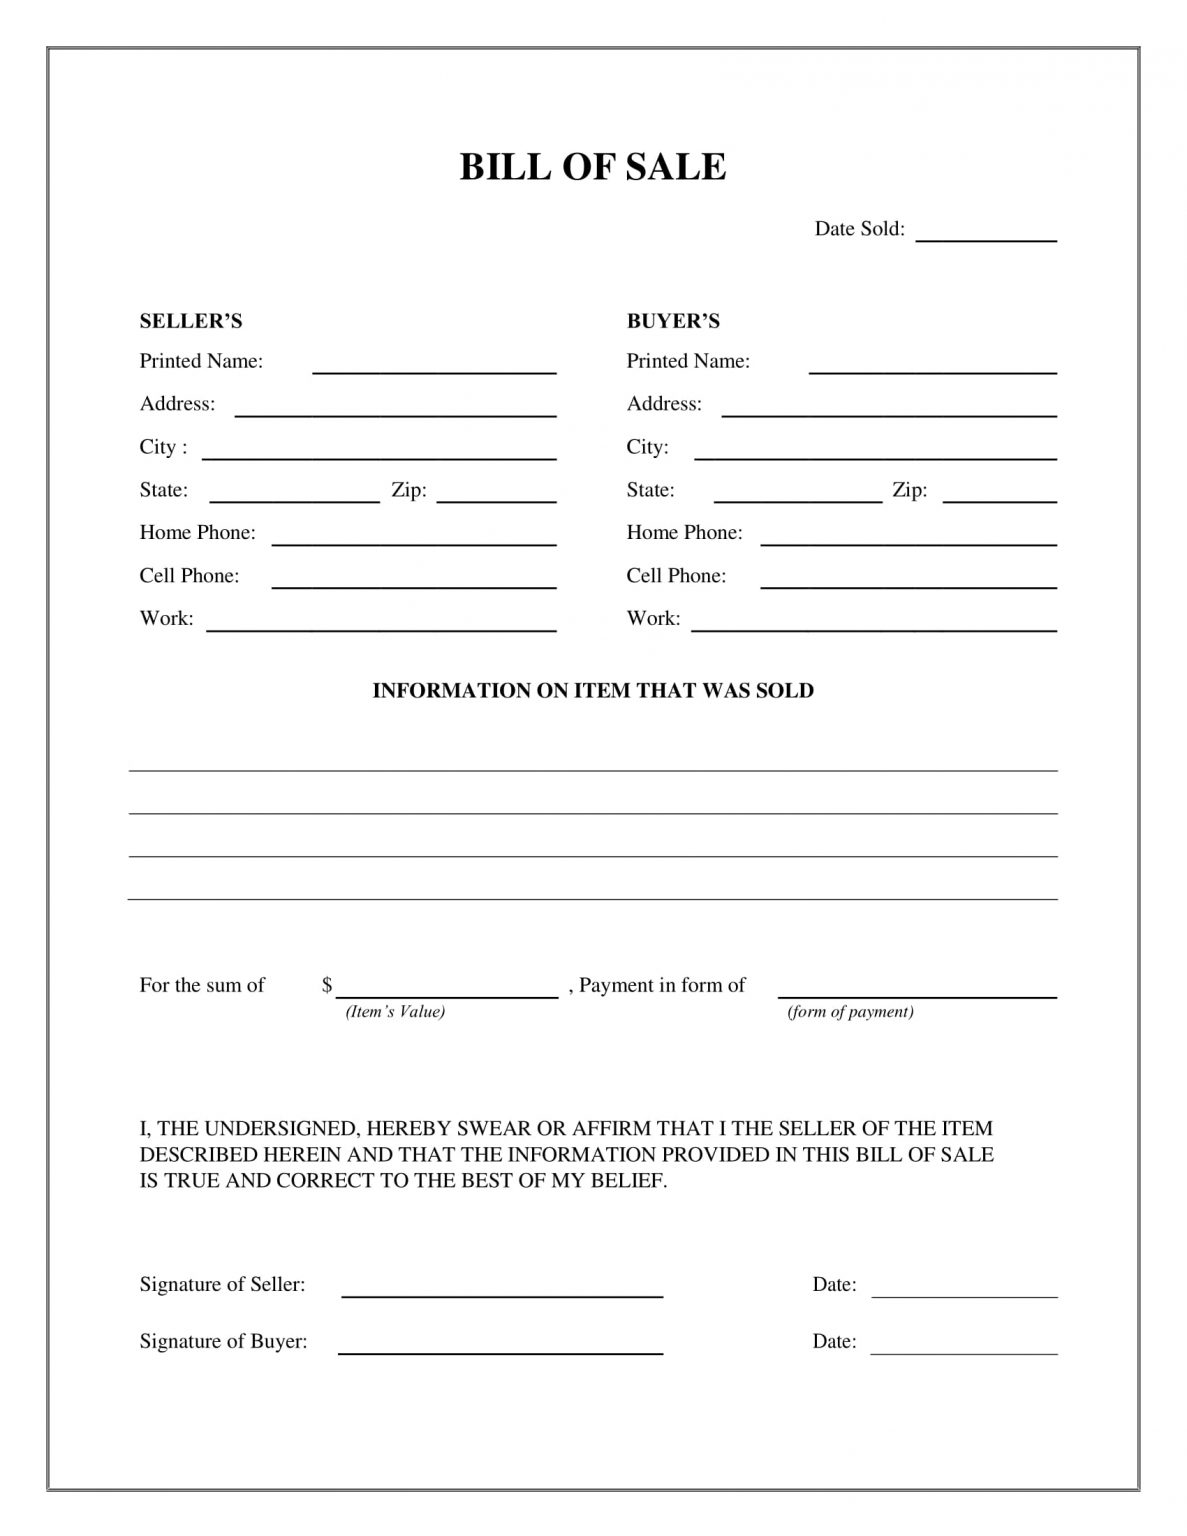 Free Fillable Bill of Sale Form